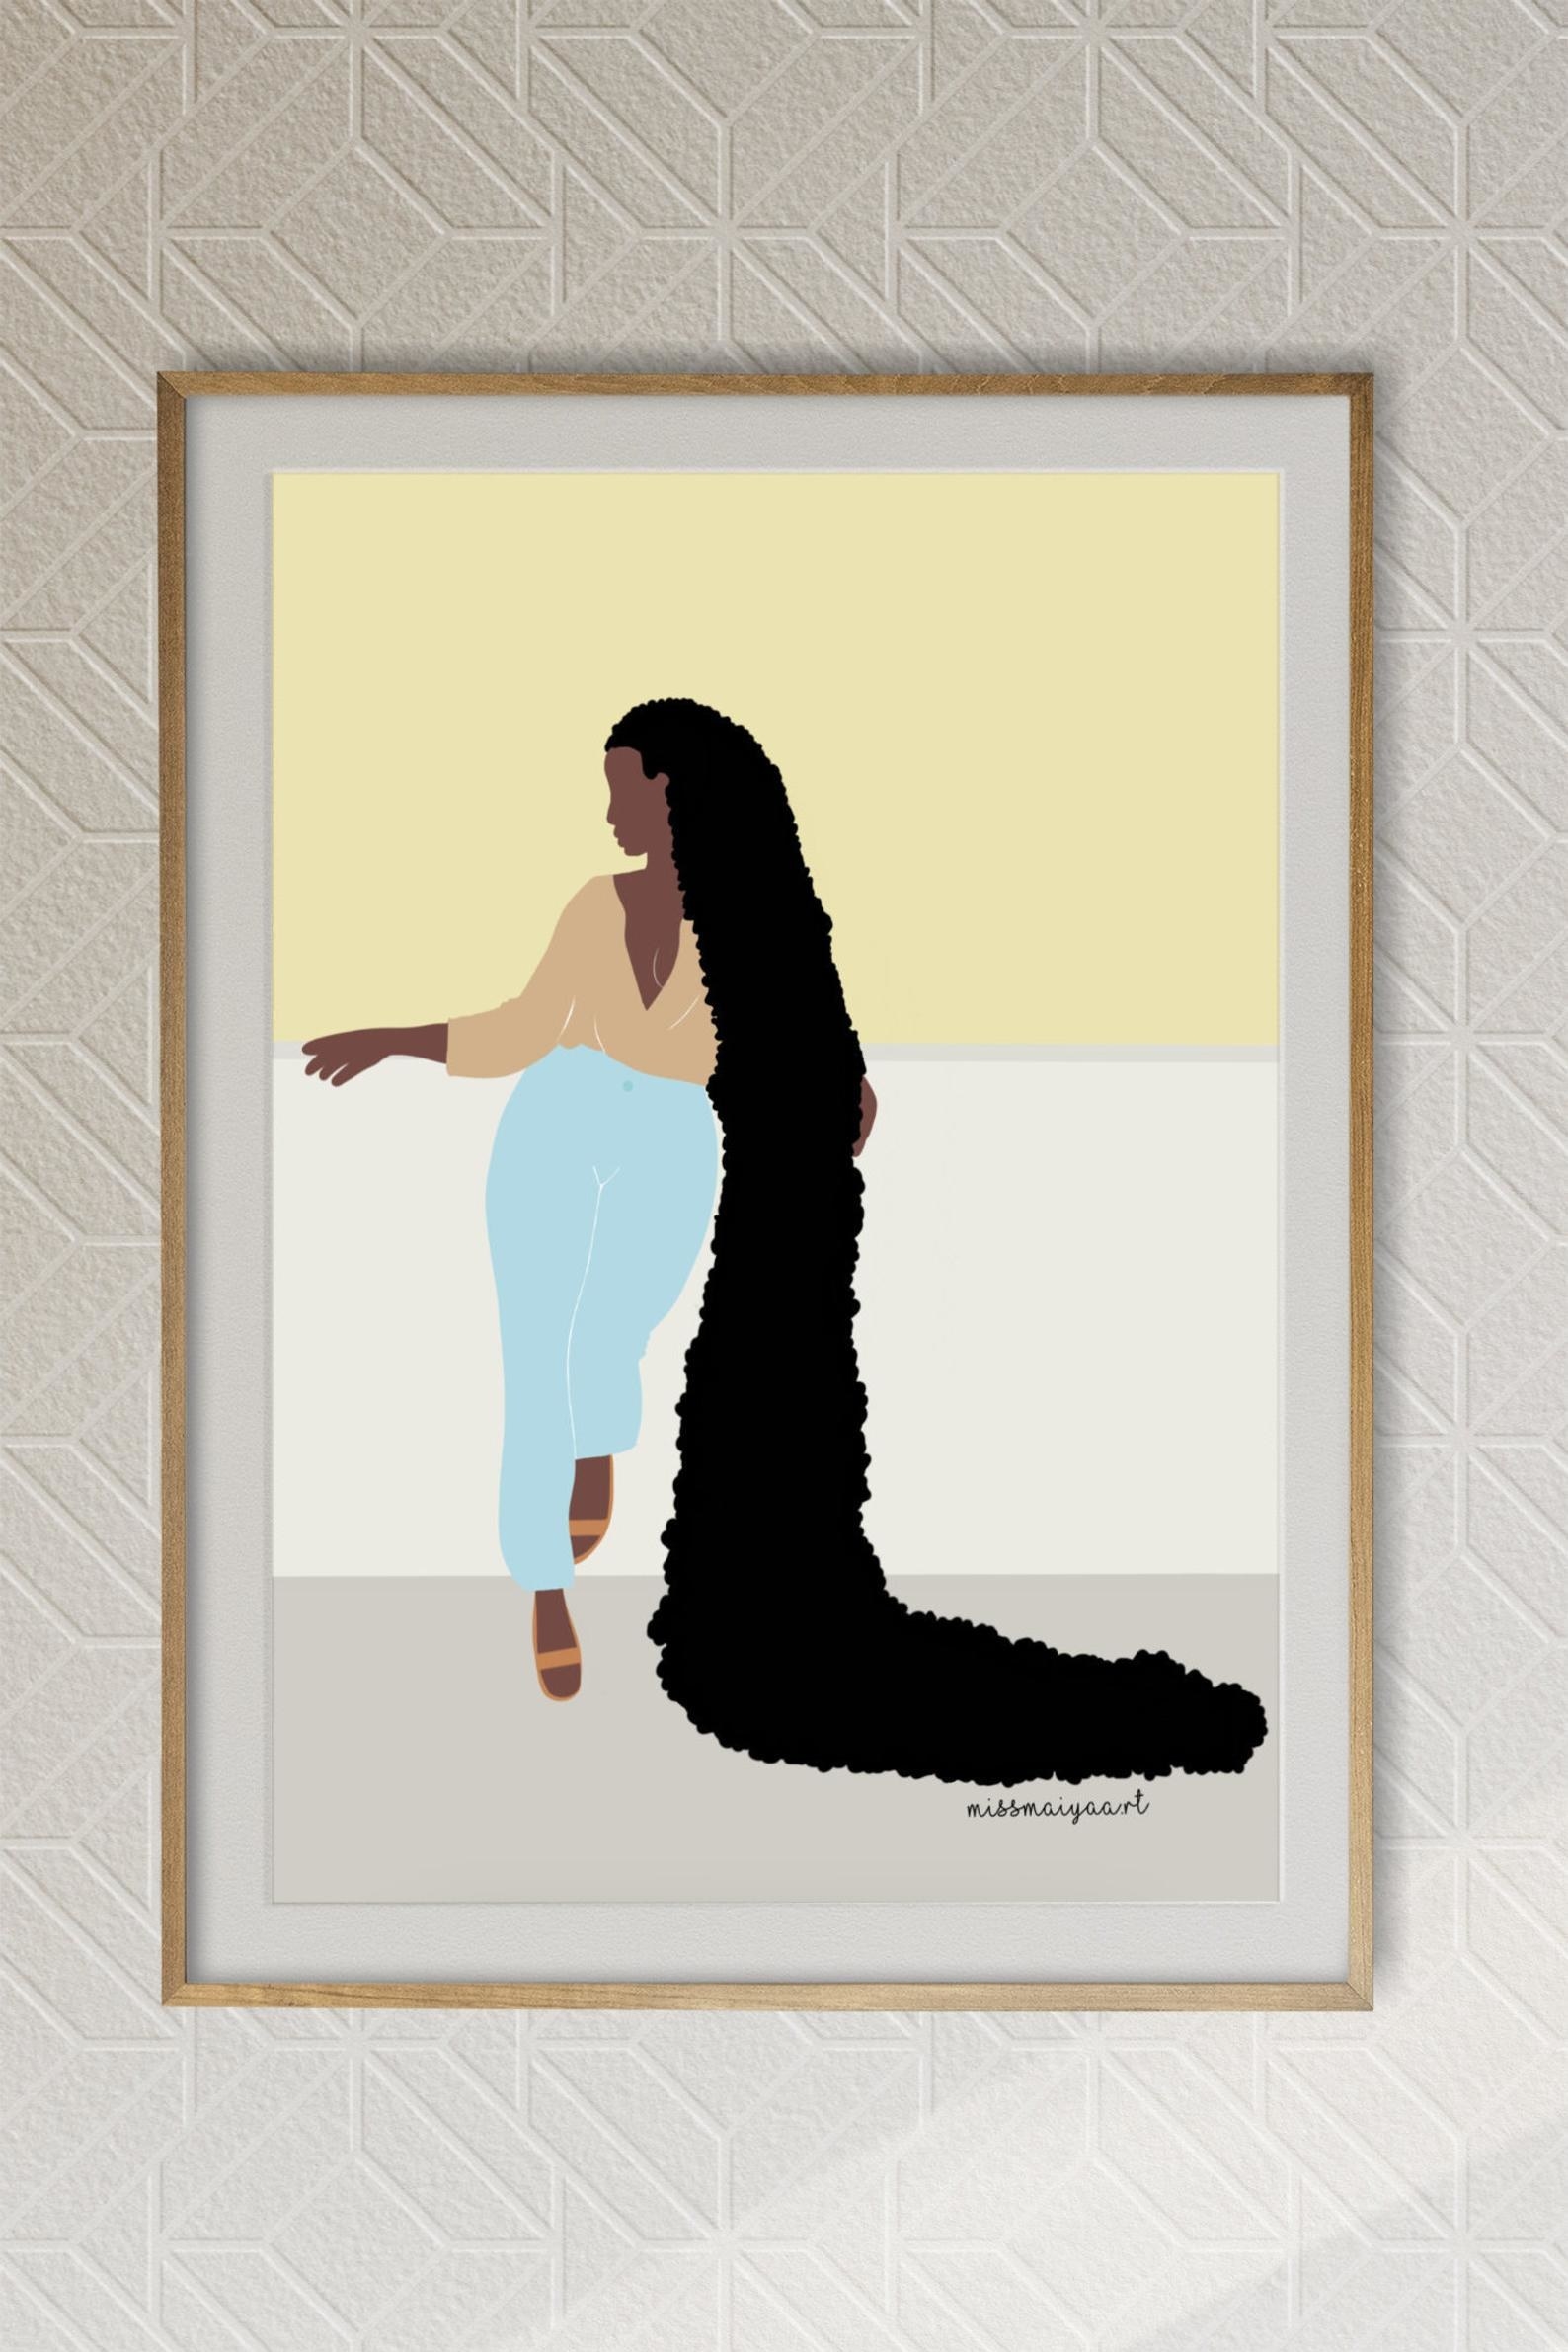 art print with an illustration of a person with very long hair